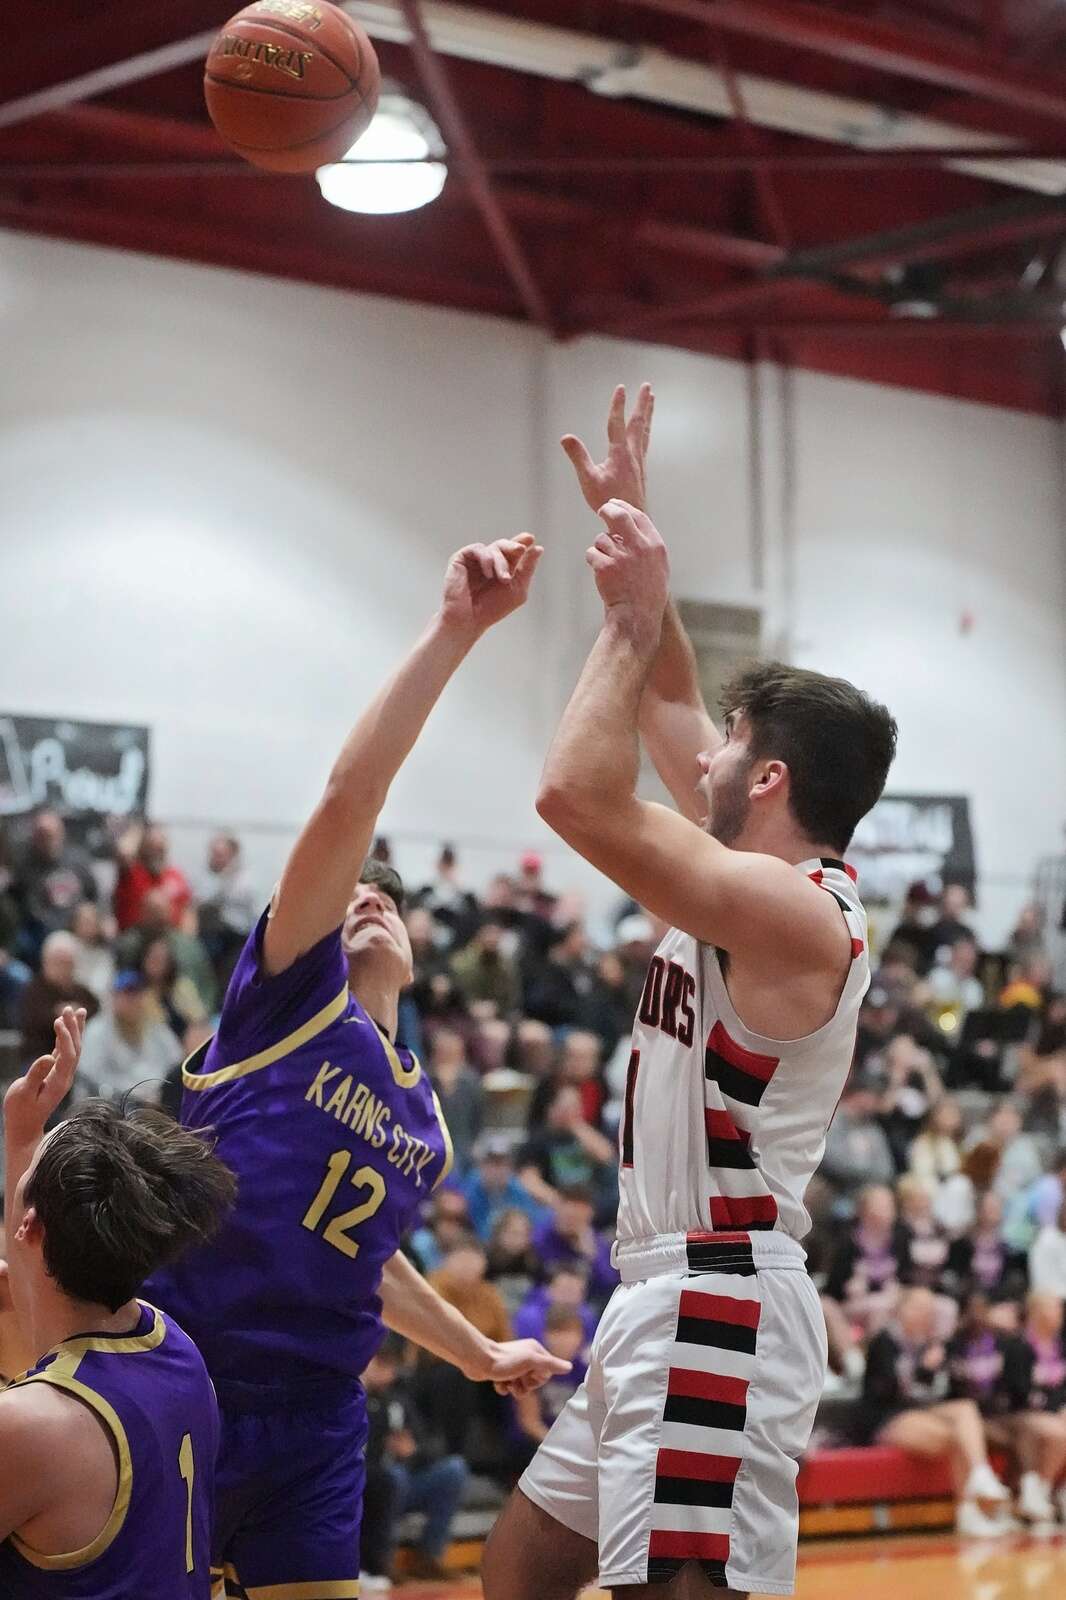 Moniteau's Landon Kelly sinks one for the Warriors